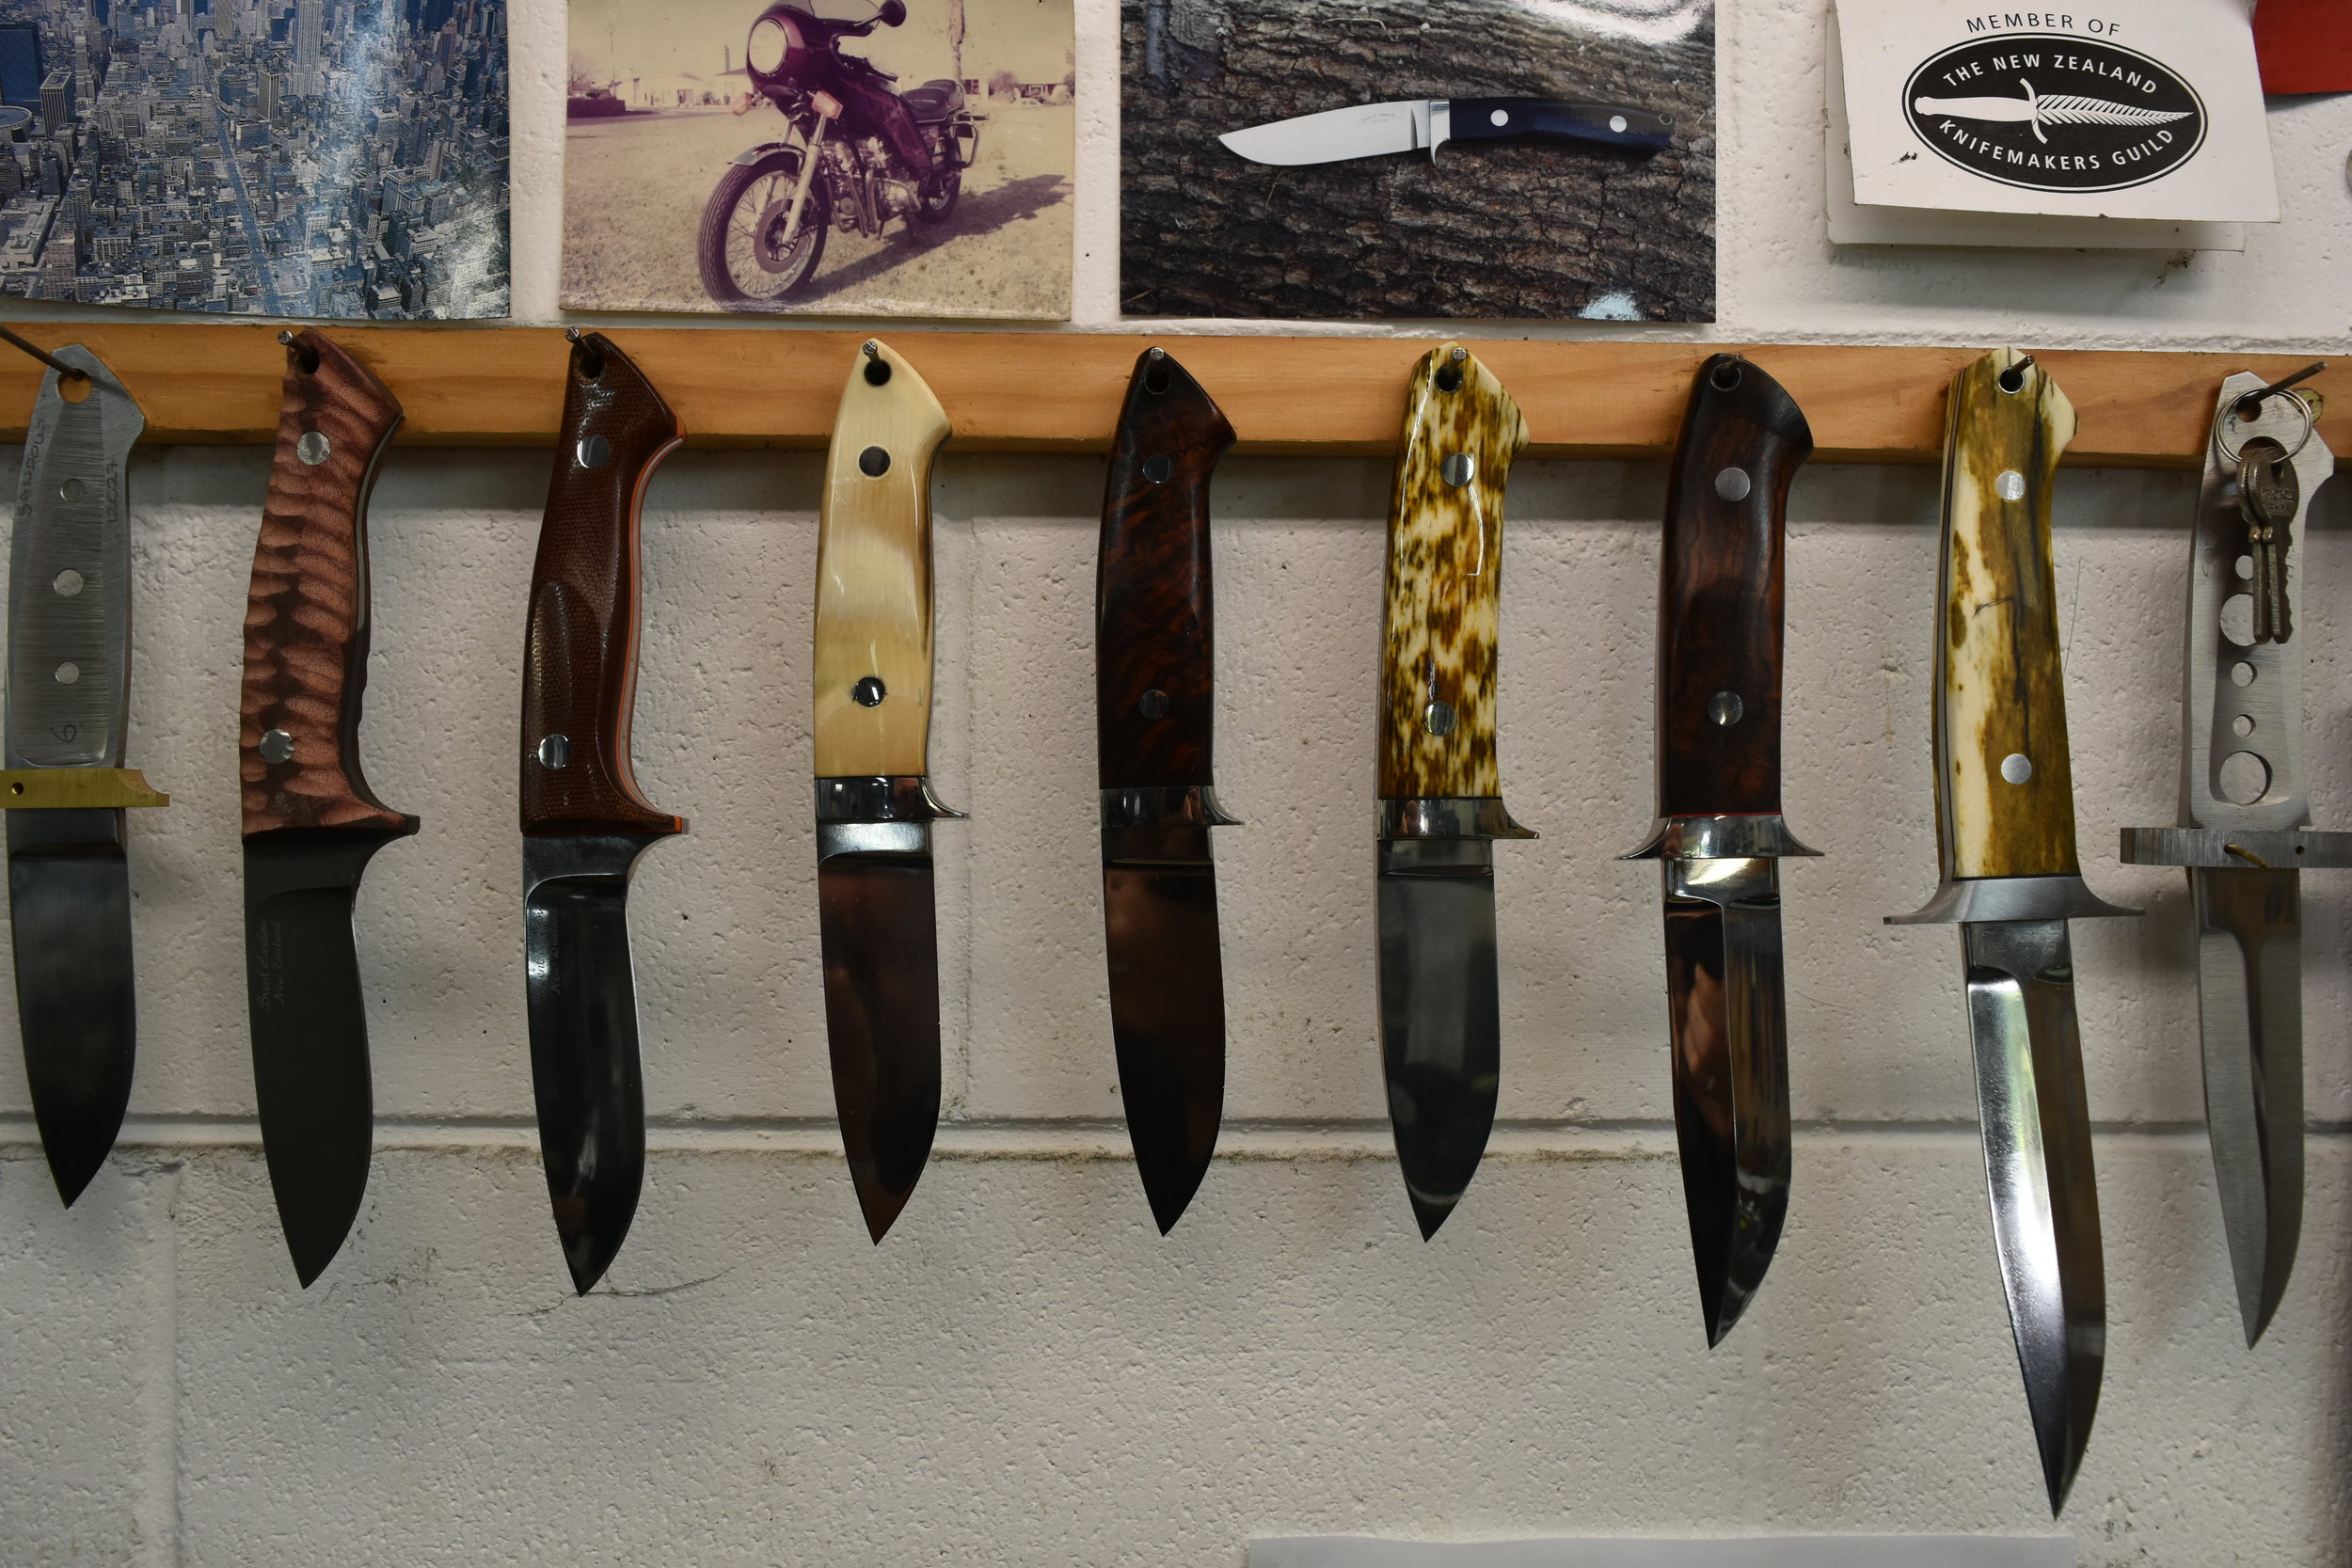 Here is a small selection of Brent's fantastic skills, a selection of Loveless-Style blades with unique handles. Second in from left a red Micatta, brown Micatta, interior Mamouth tusk, crutch Cocobolo, Giraffe bone, Arizona Ironwood and another Gir…